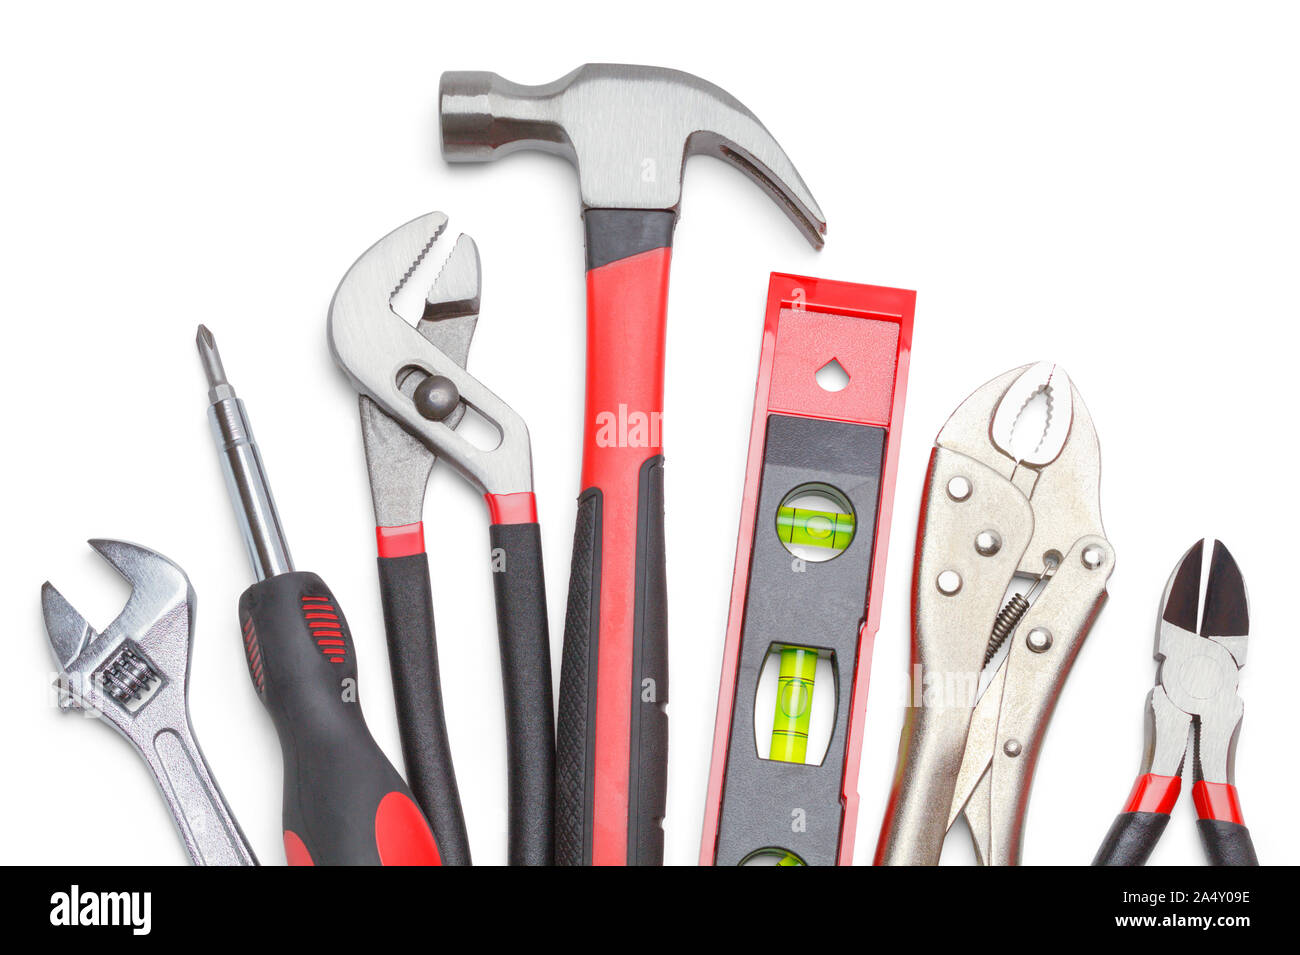 Work Hand Tools Isolated on White Background. Stock Photo